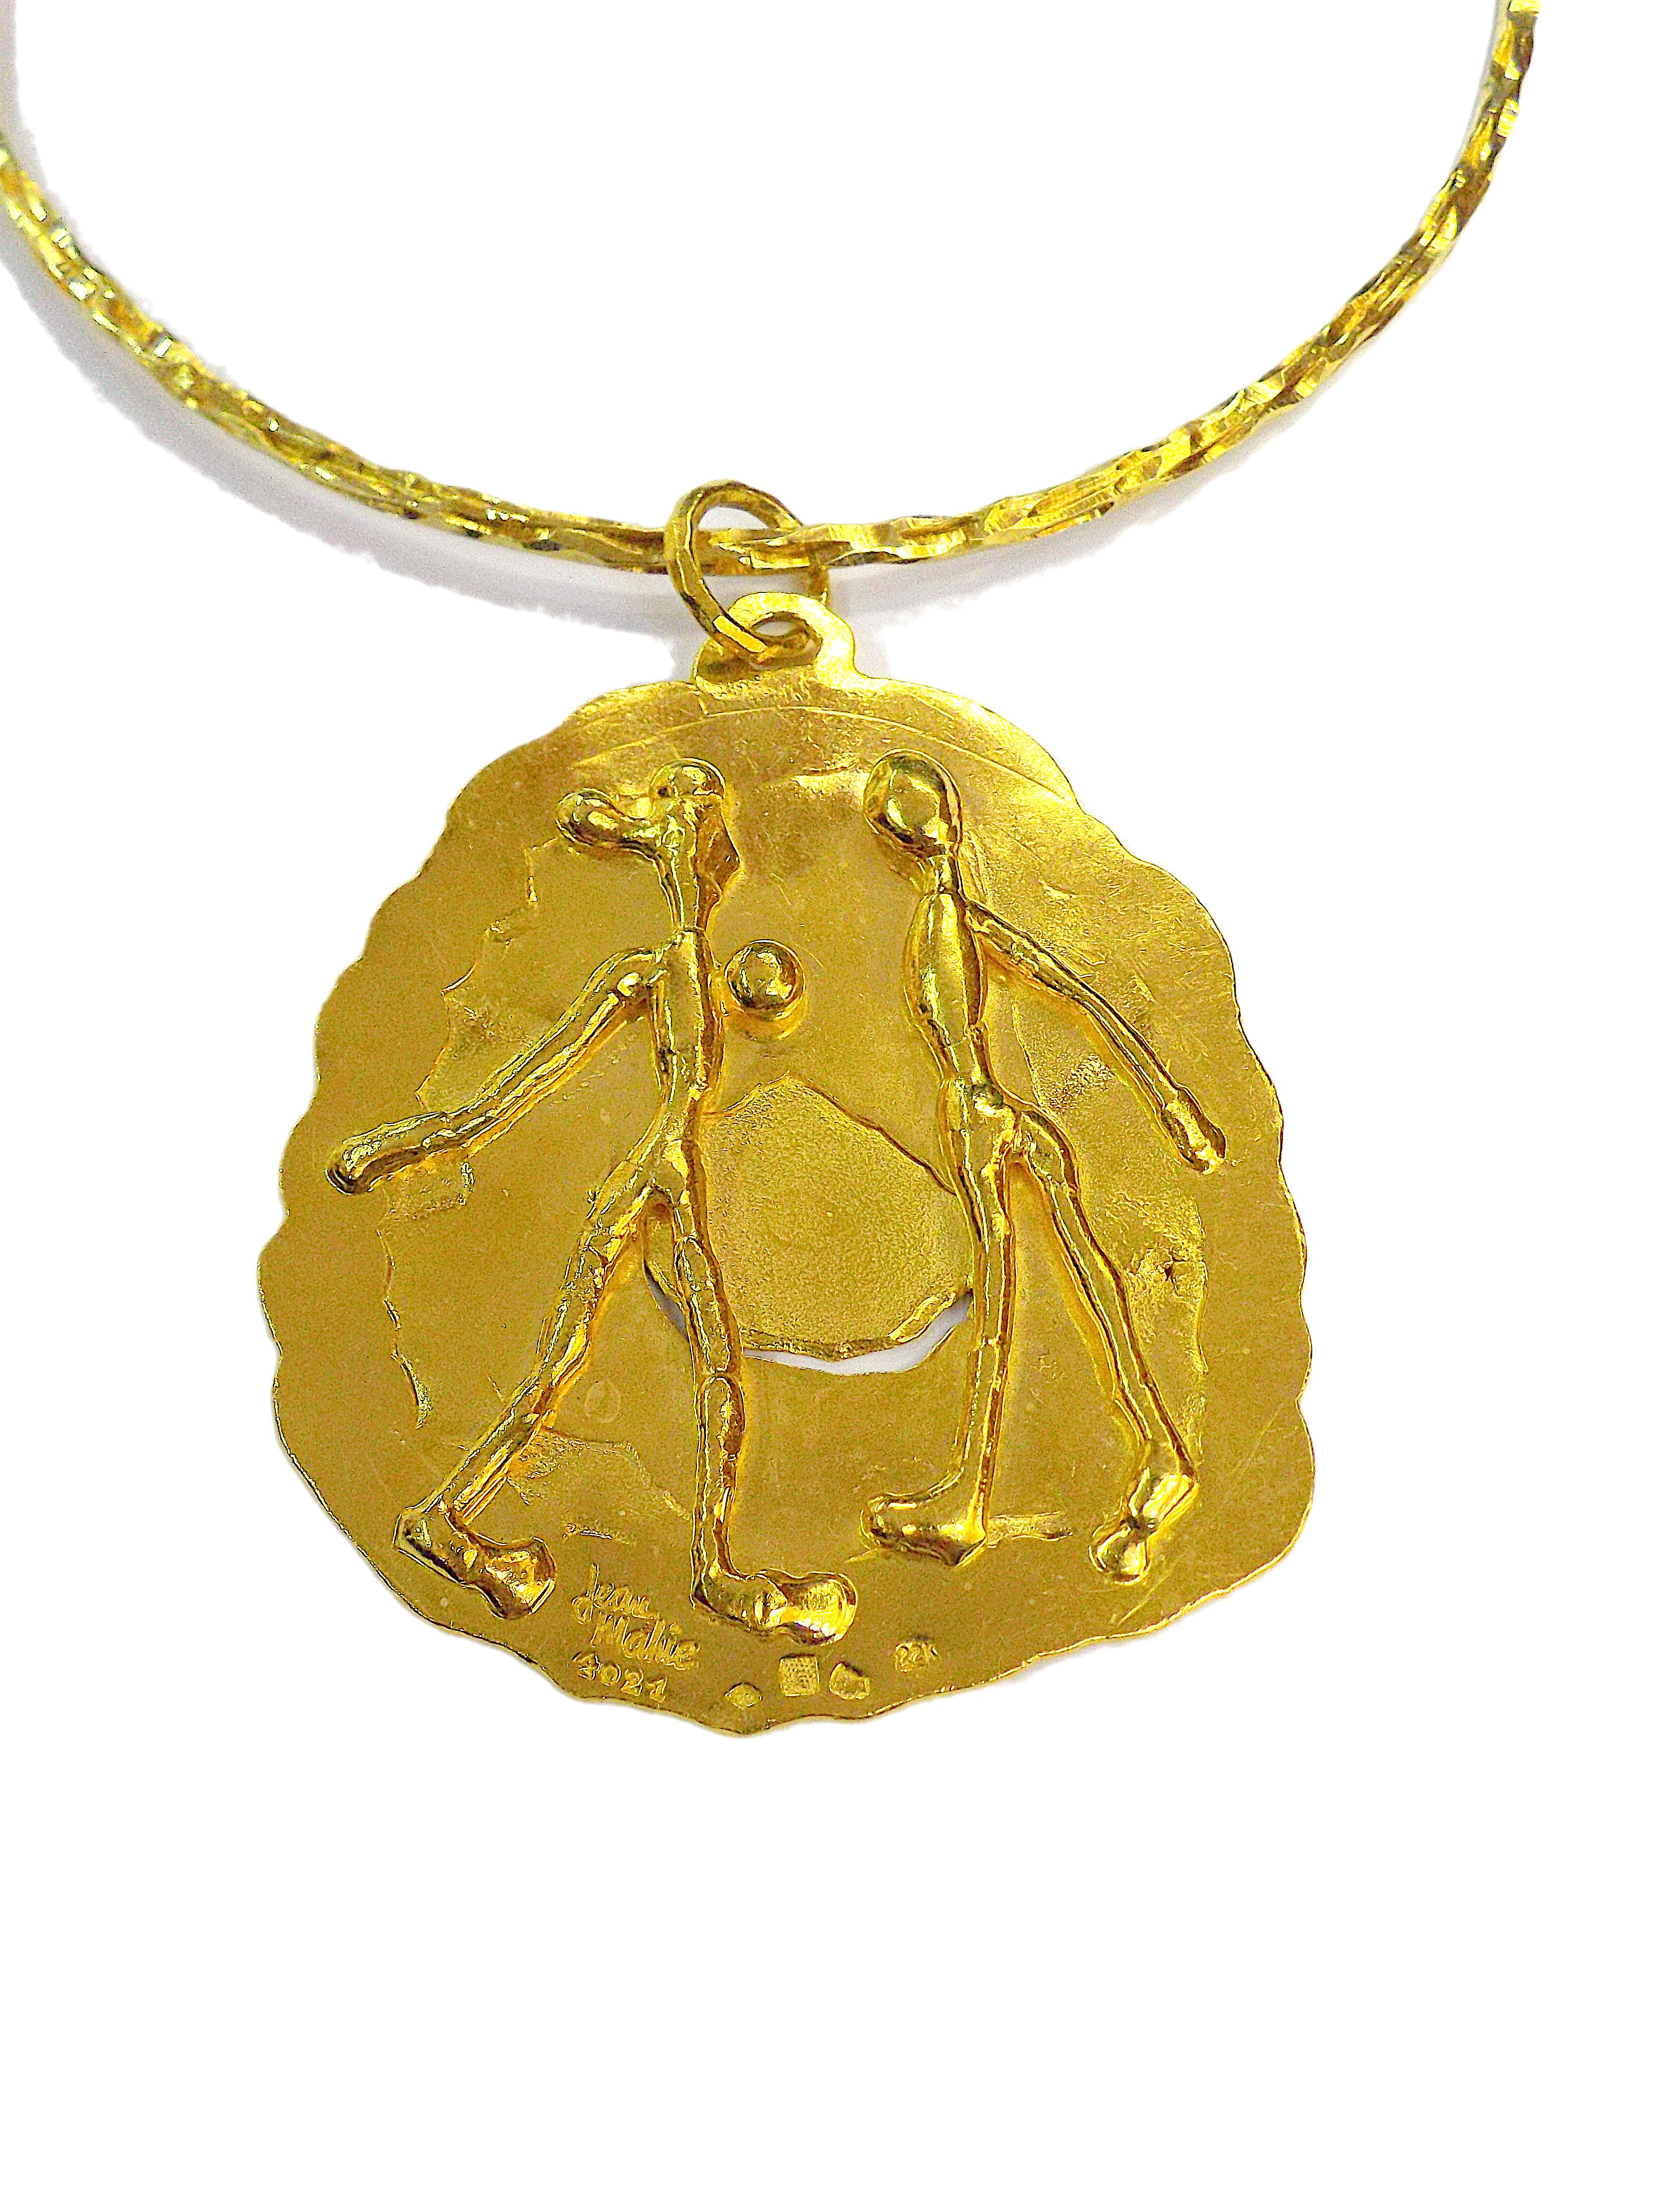 Metal: 22k gold, 18k gold
Gross Weight: 104.23 grams
Pendant Dimensions: 3-1/4 inches x 2-3/8 inches
Necklace Dimensions: 14-1/2 inches x 1/8 inch
The necklace is marked Moba 18k italy and weighs 30.20 grams, the pendant is marked Jean Mahie 22k and